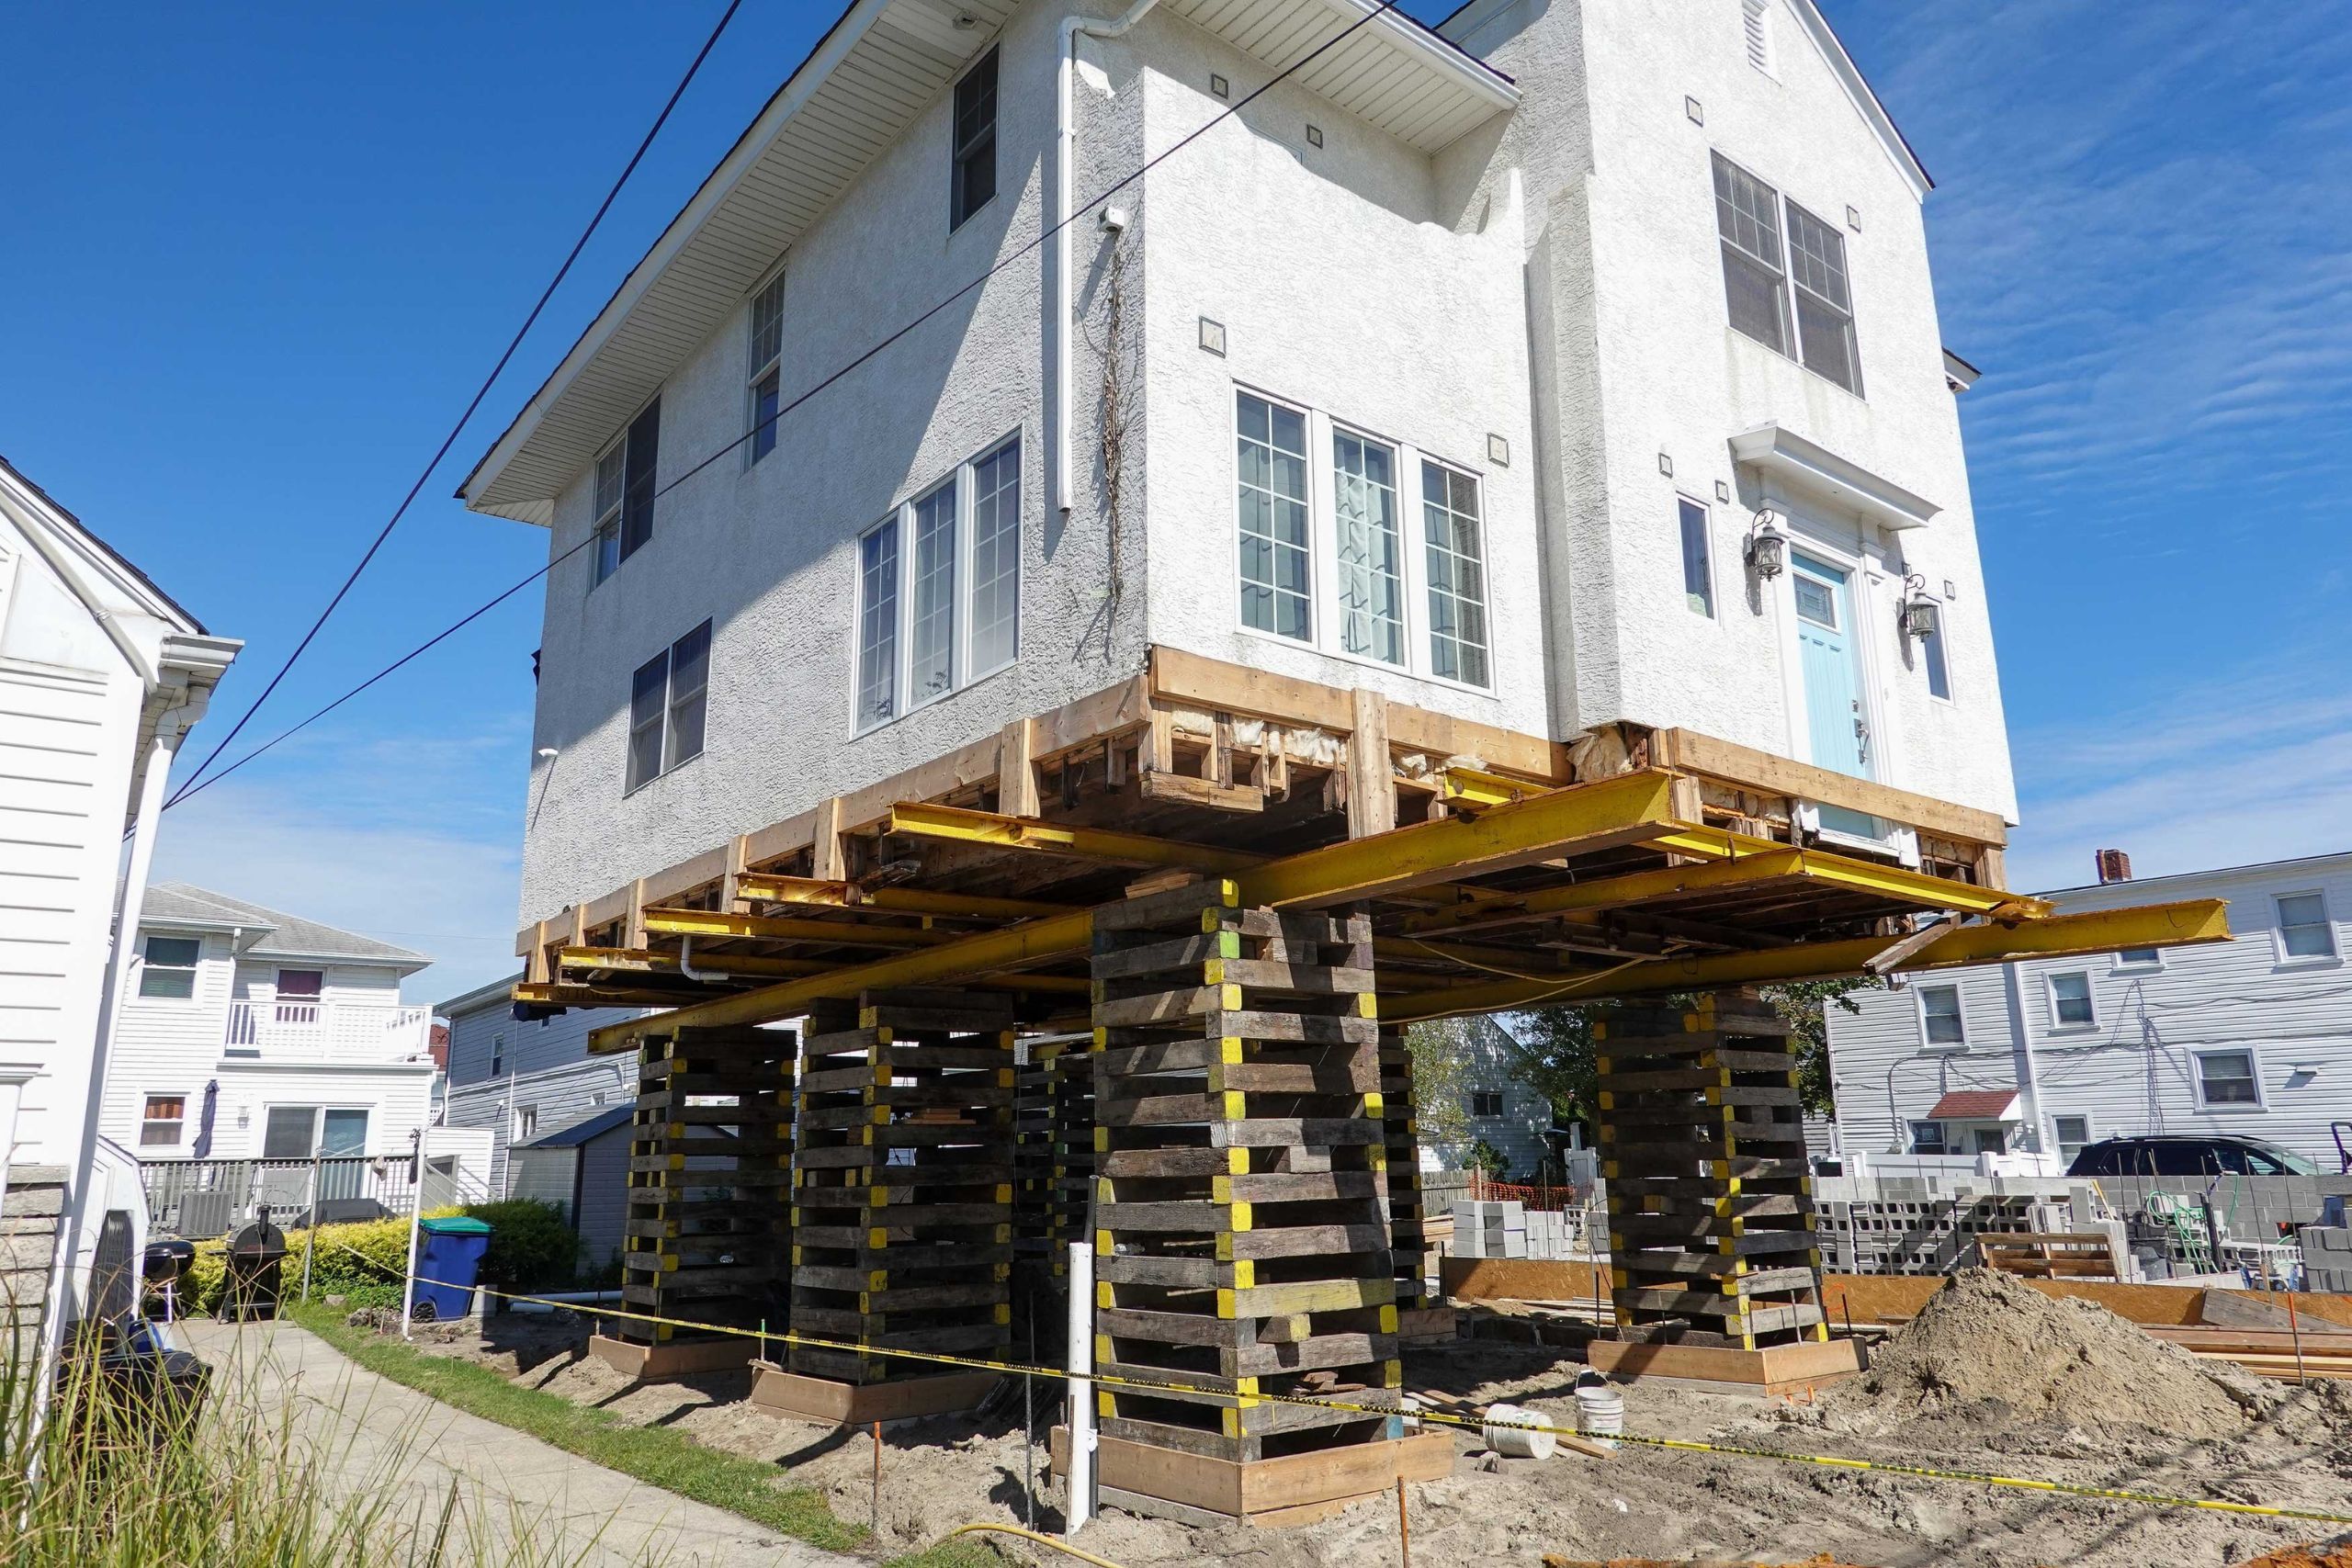 Located in Fort Lauderdale, Florida, we are a company that specializes in house lifting, small distance house moving, piles and foundations.